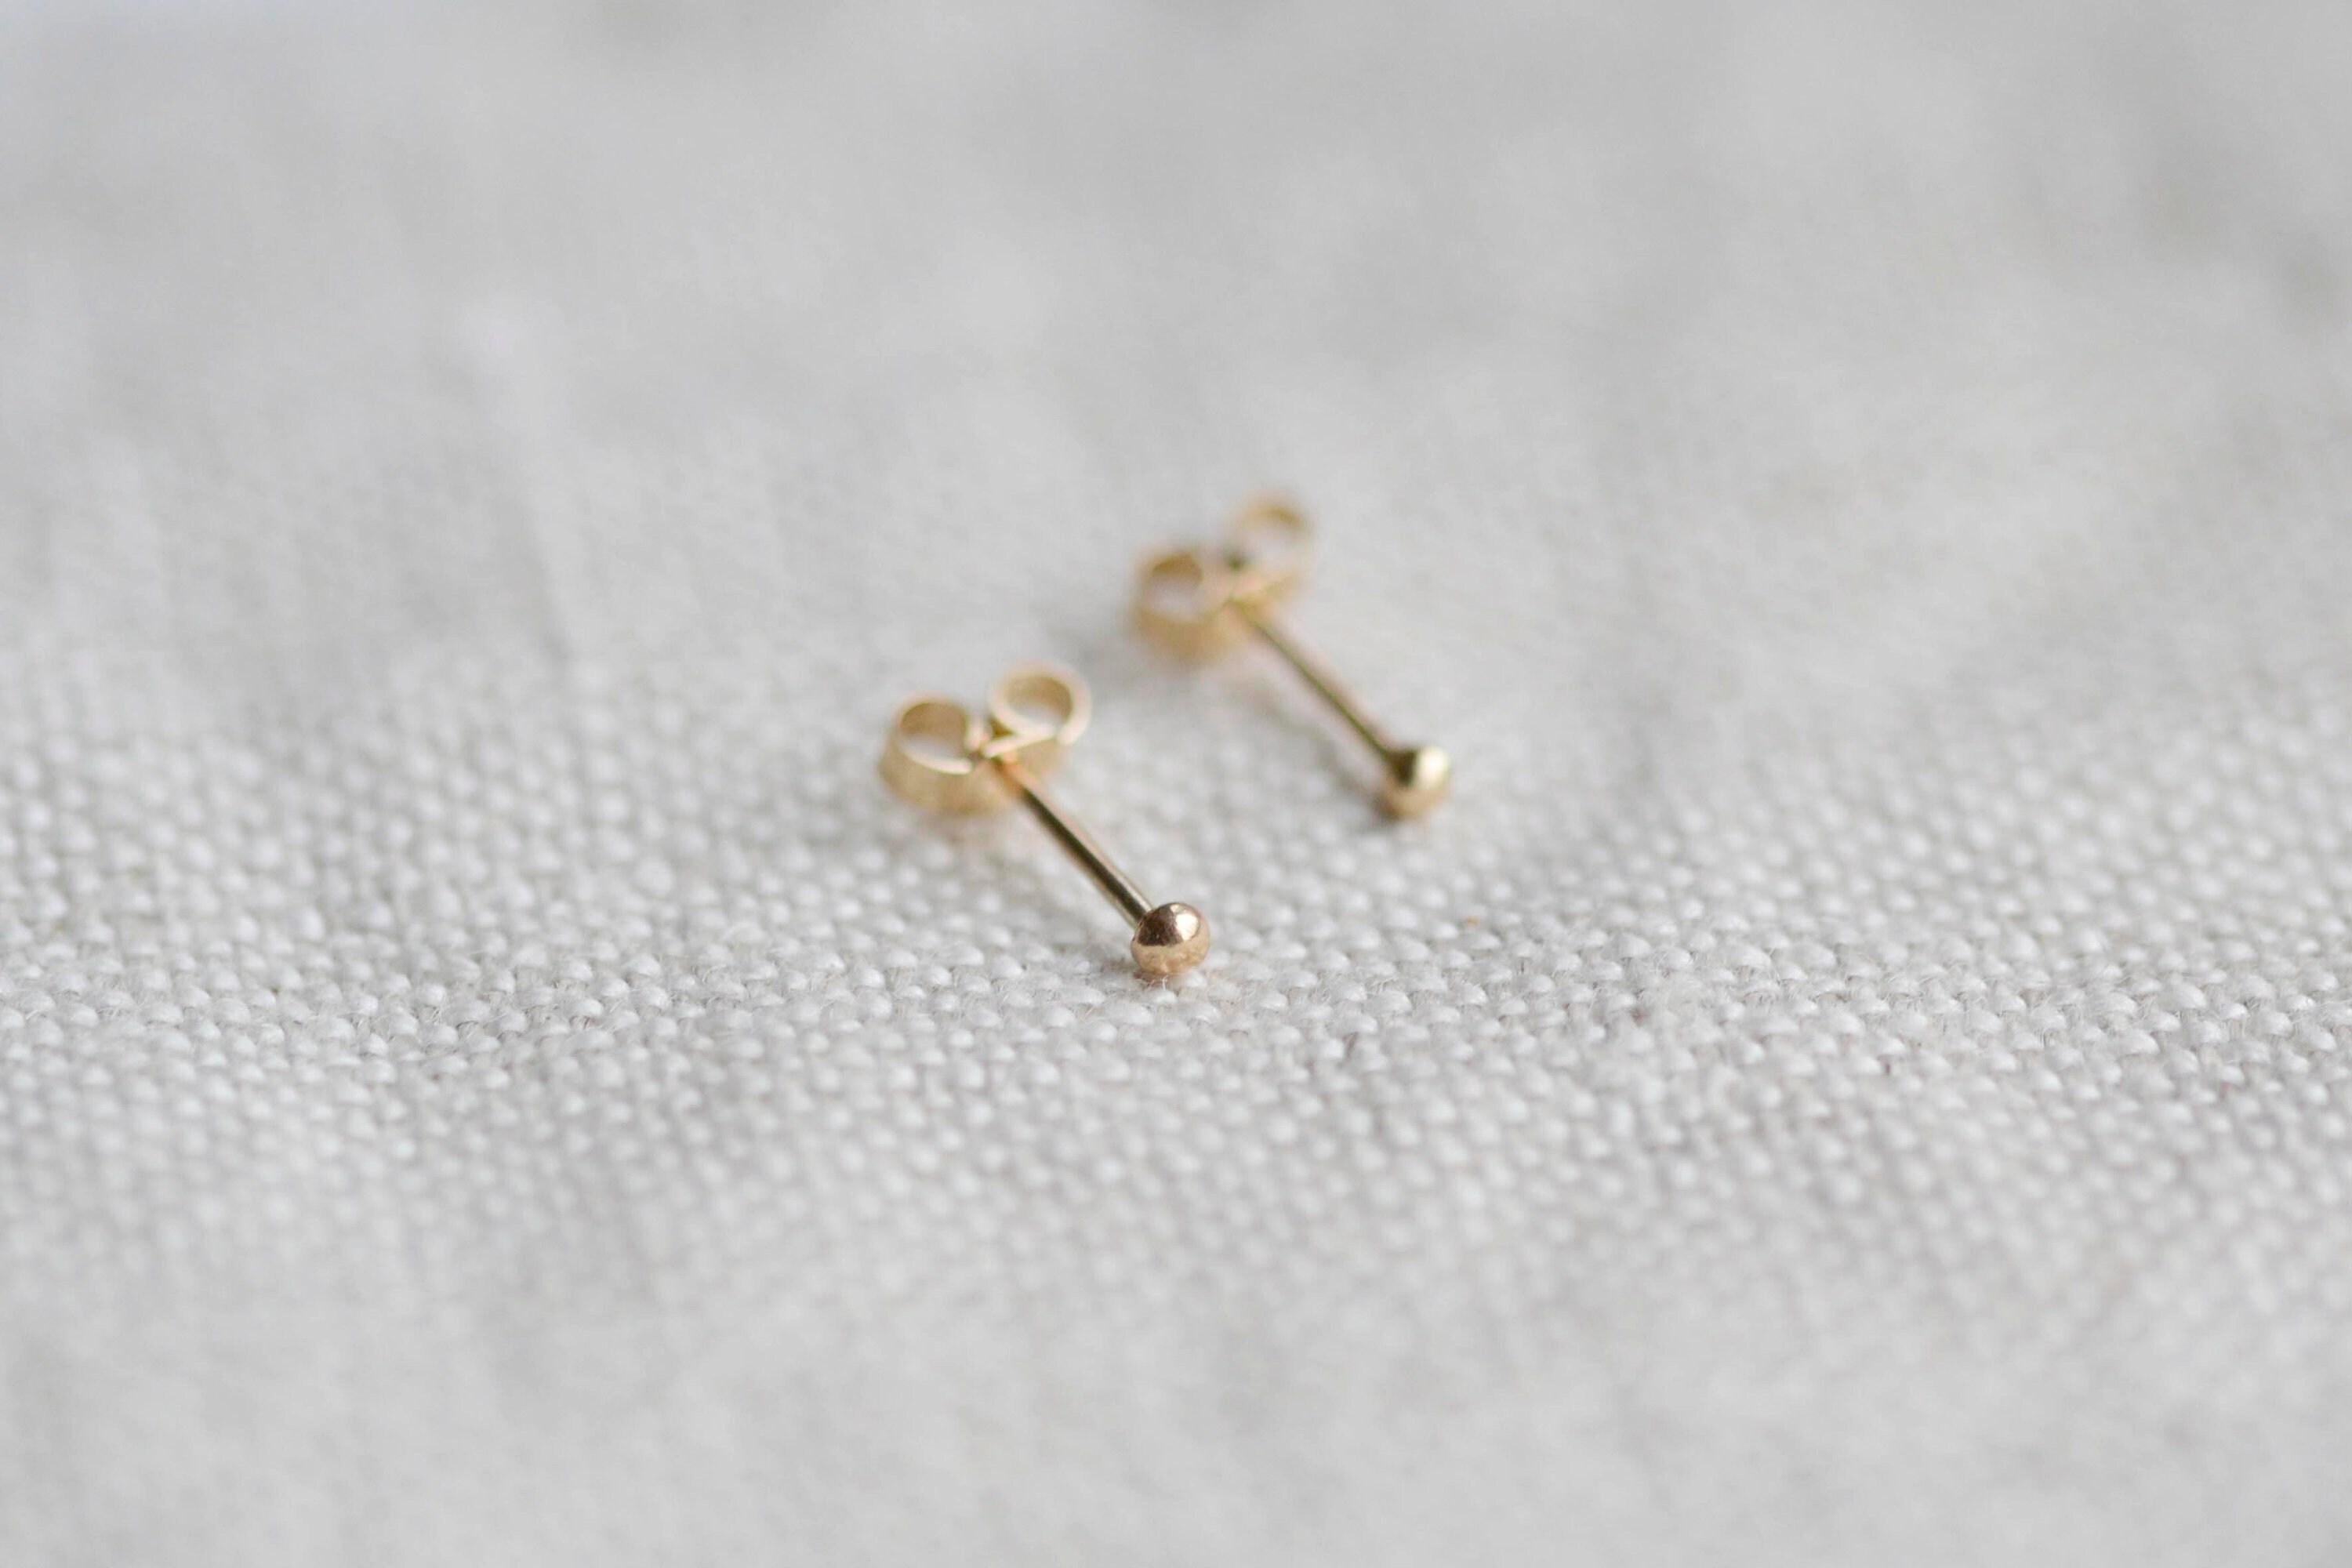 Tiny 9Ct Gold Dot Studs | Very Small 2mm Stud Earring Ball Real Earrings Solid